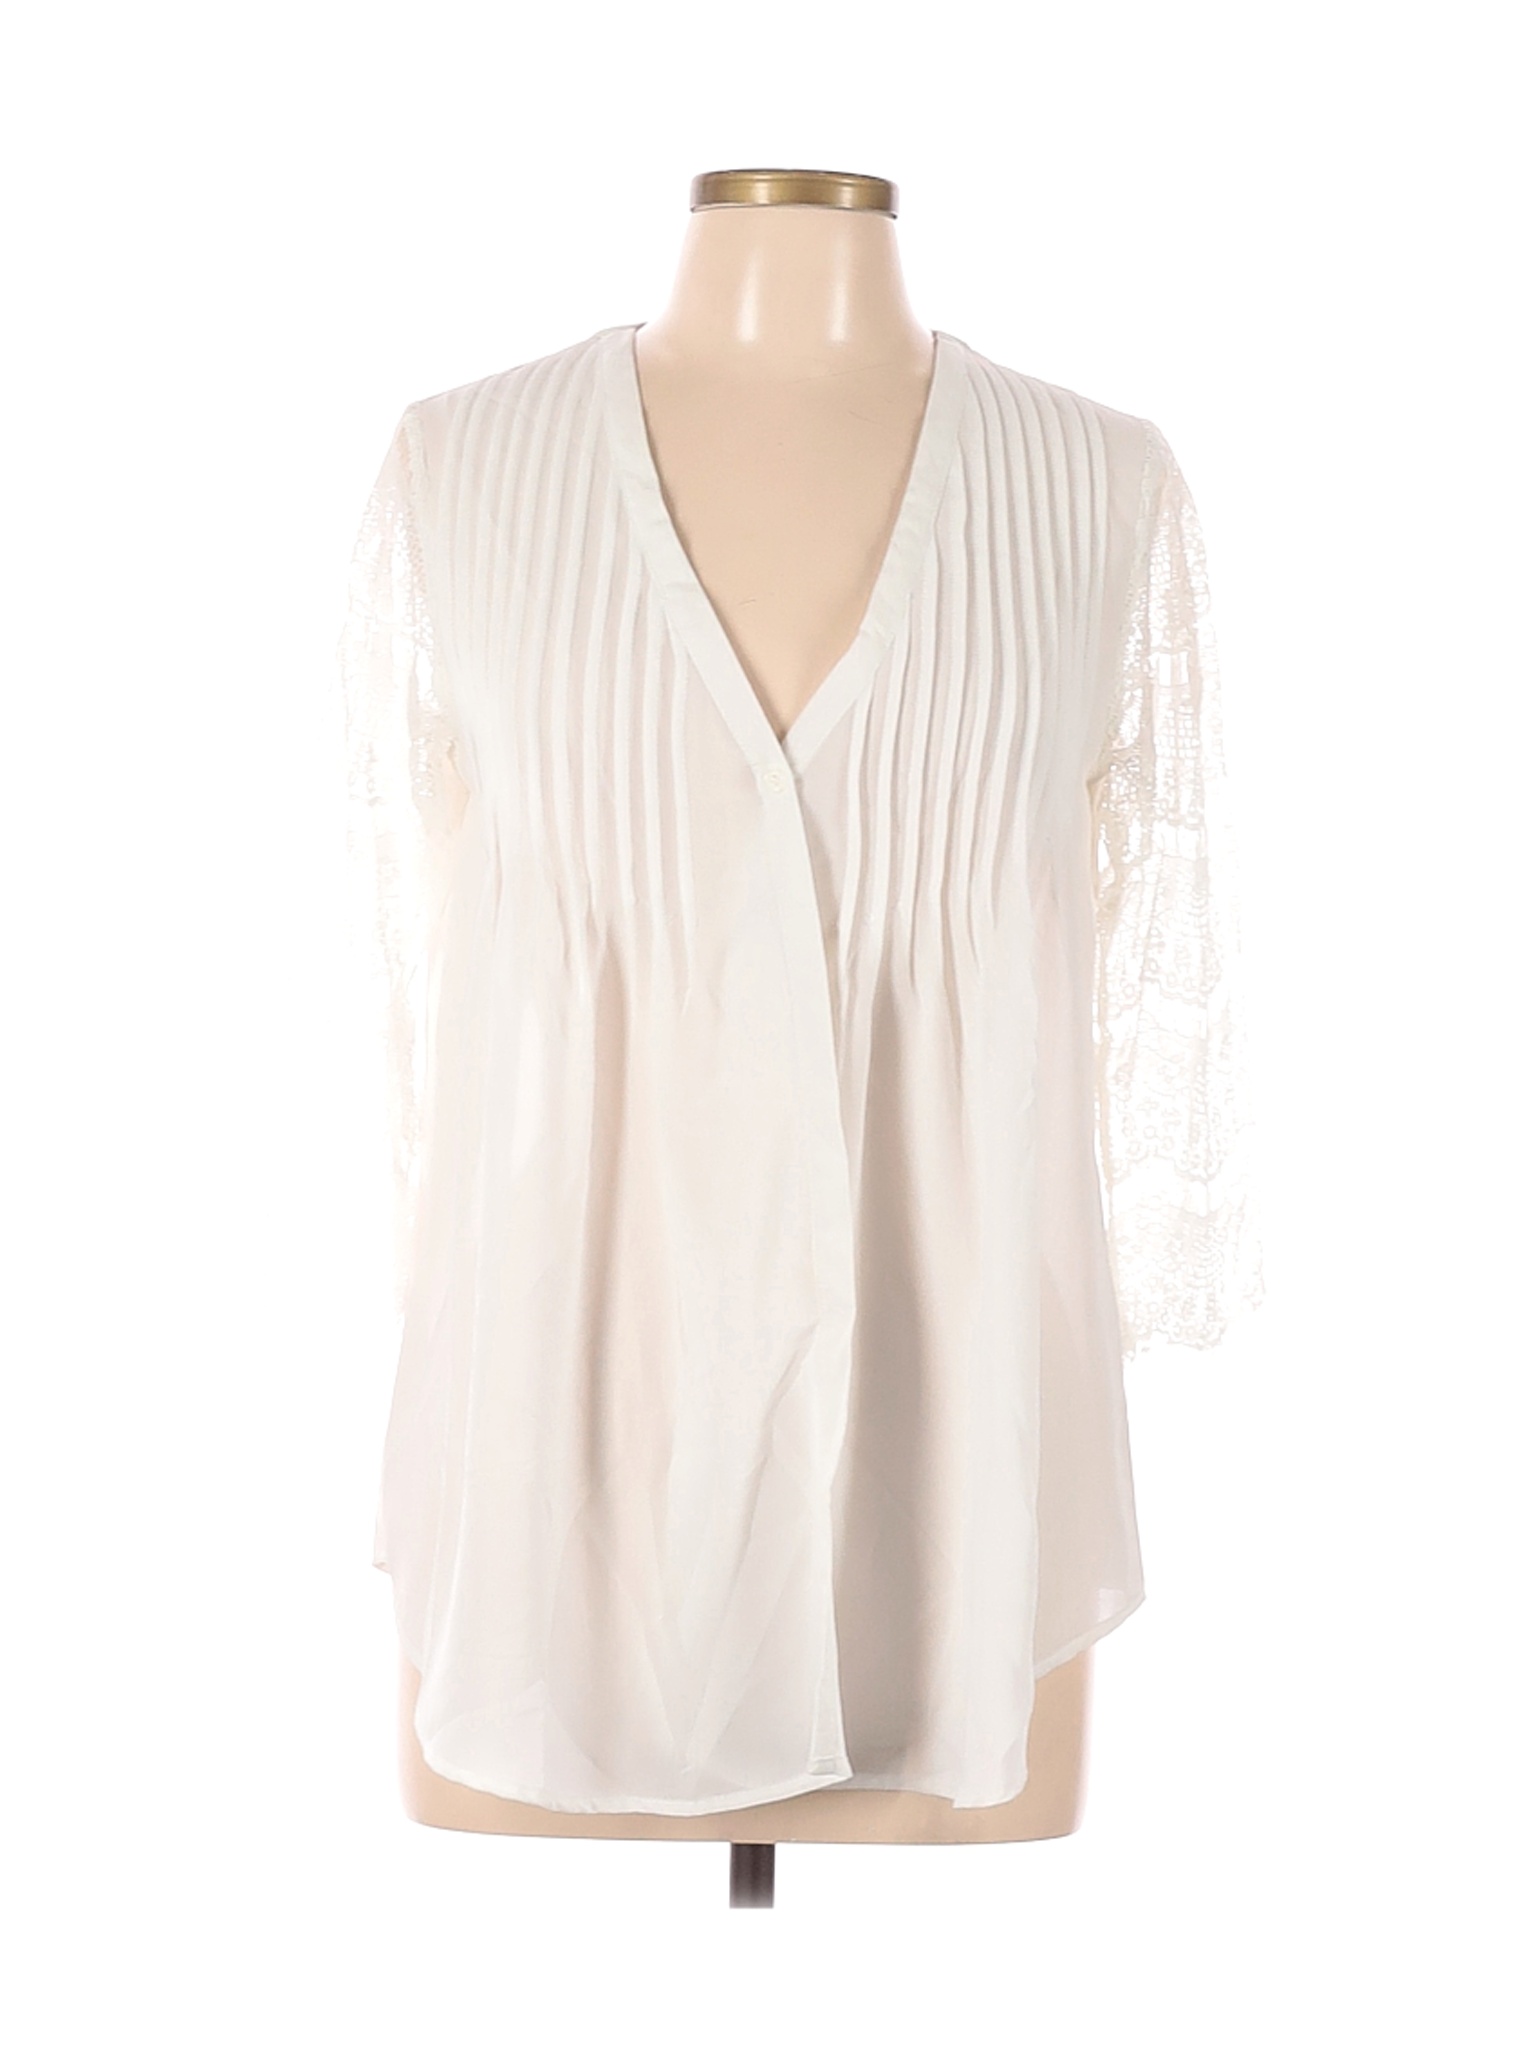 Love Stitch Solid Ivory White 3/4 Sleeve Blouse Size M - 77% off | thredUP